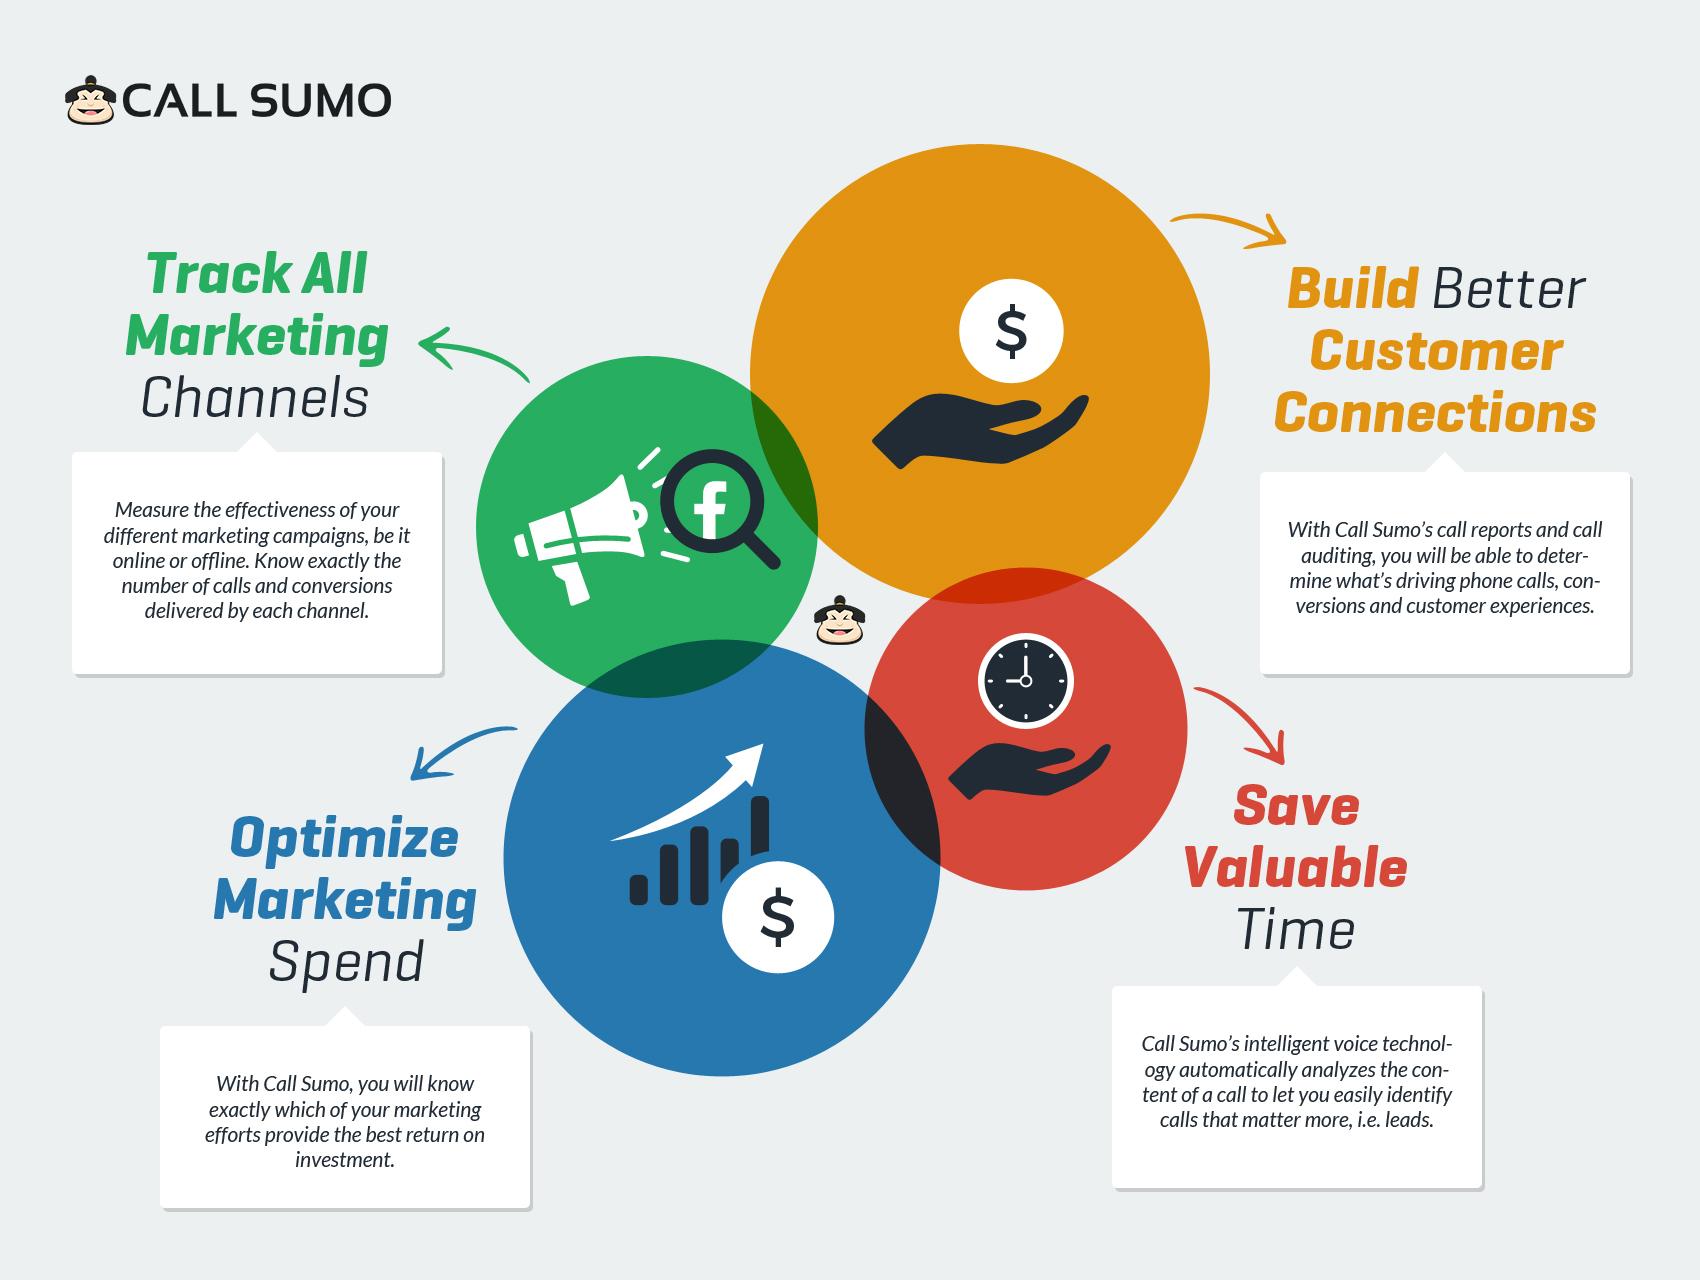 Build Better Customer Connection with Call Sumo’s Call Tracking Software